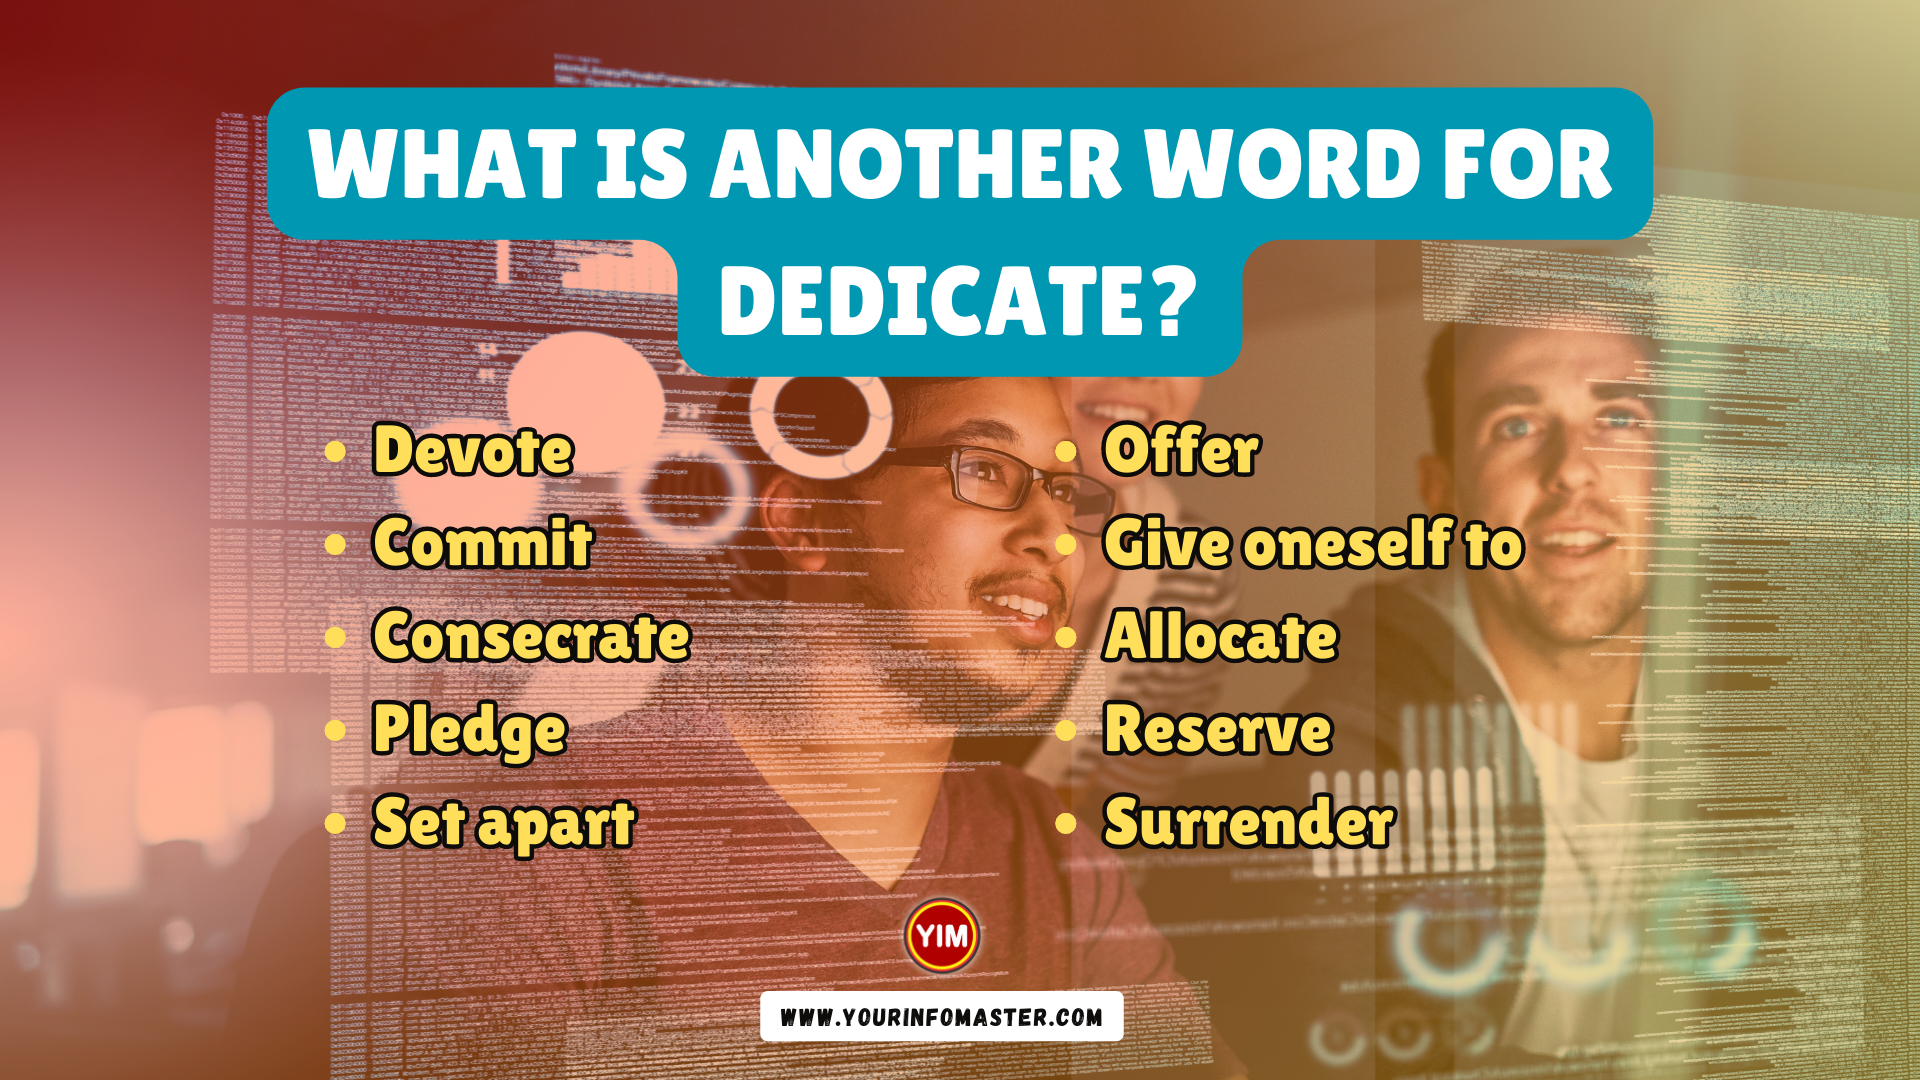 What is another word for Dedicate